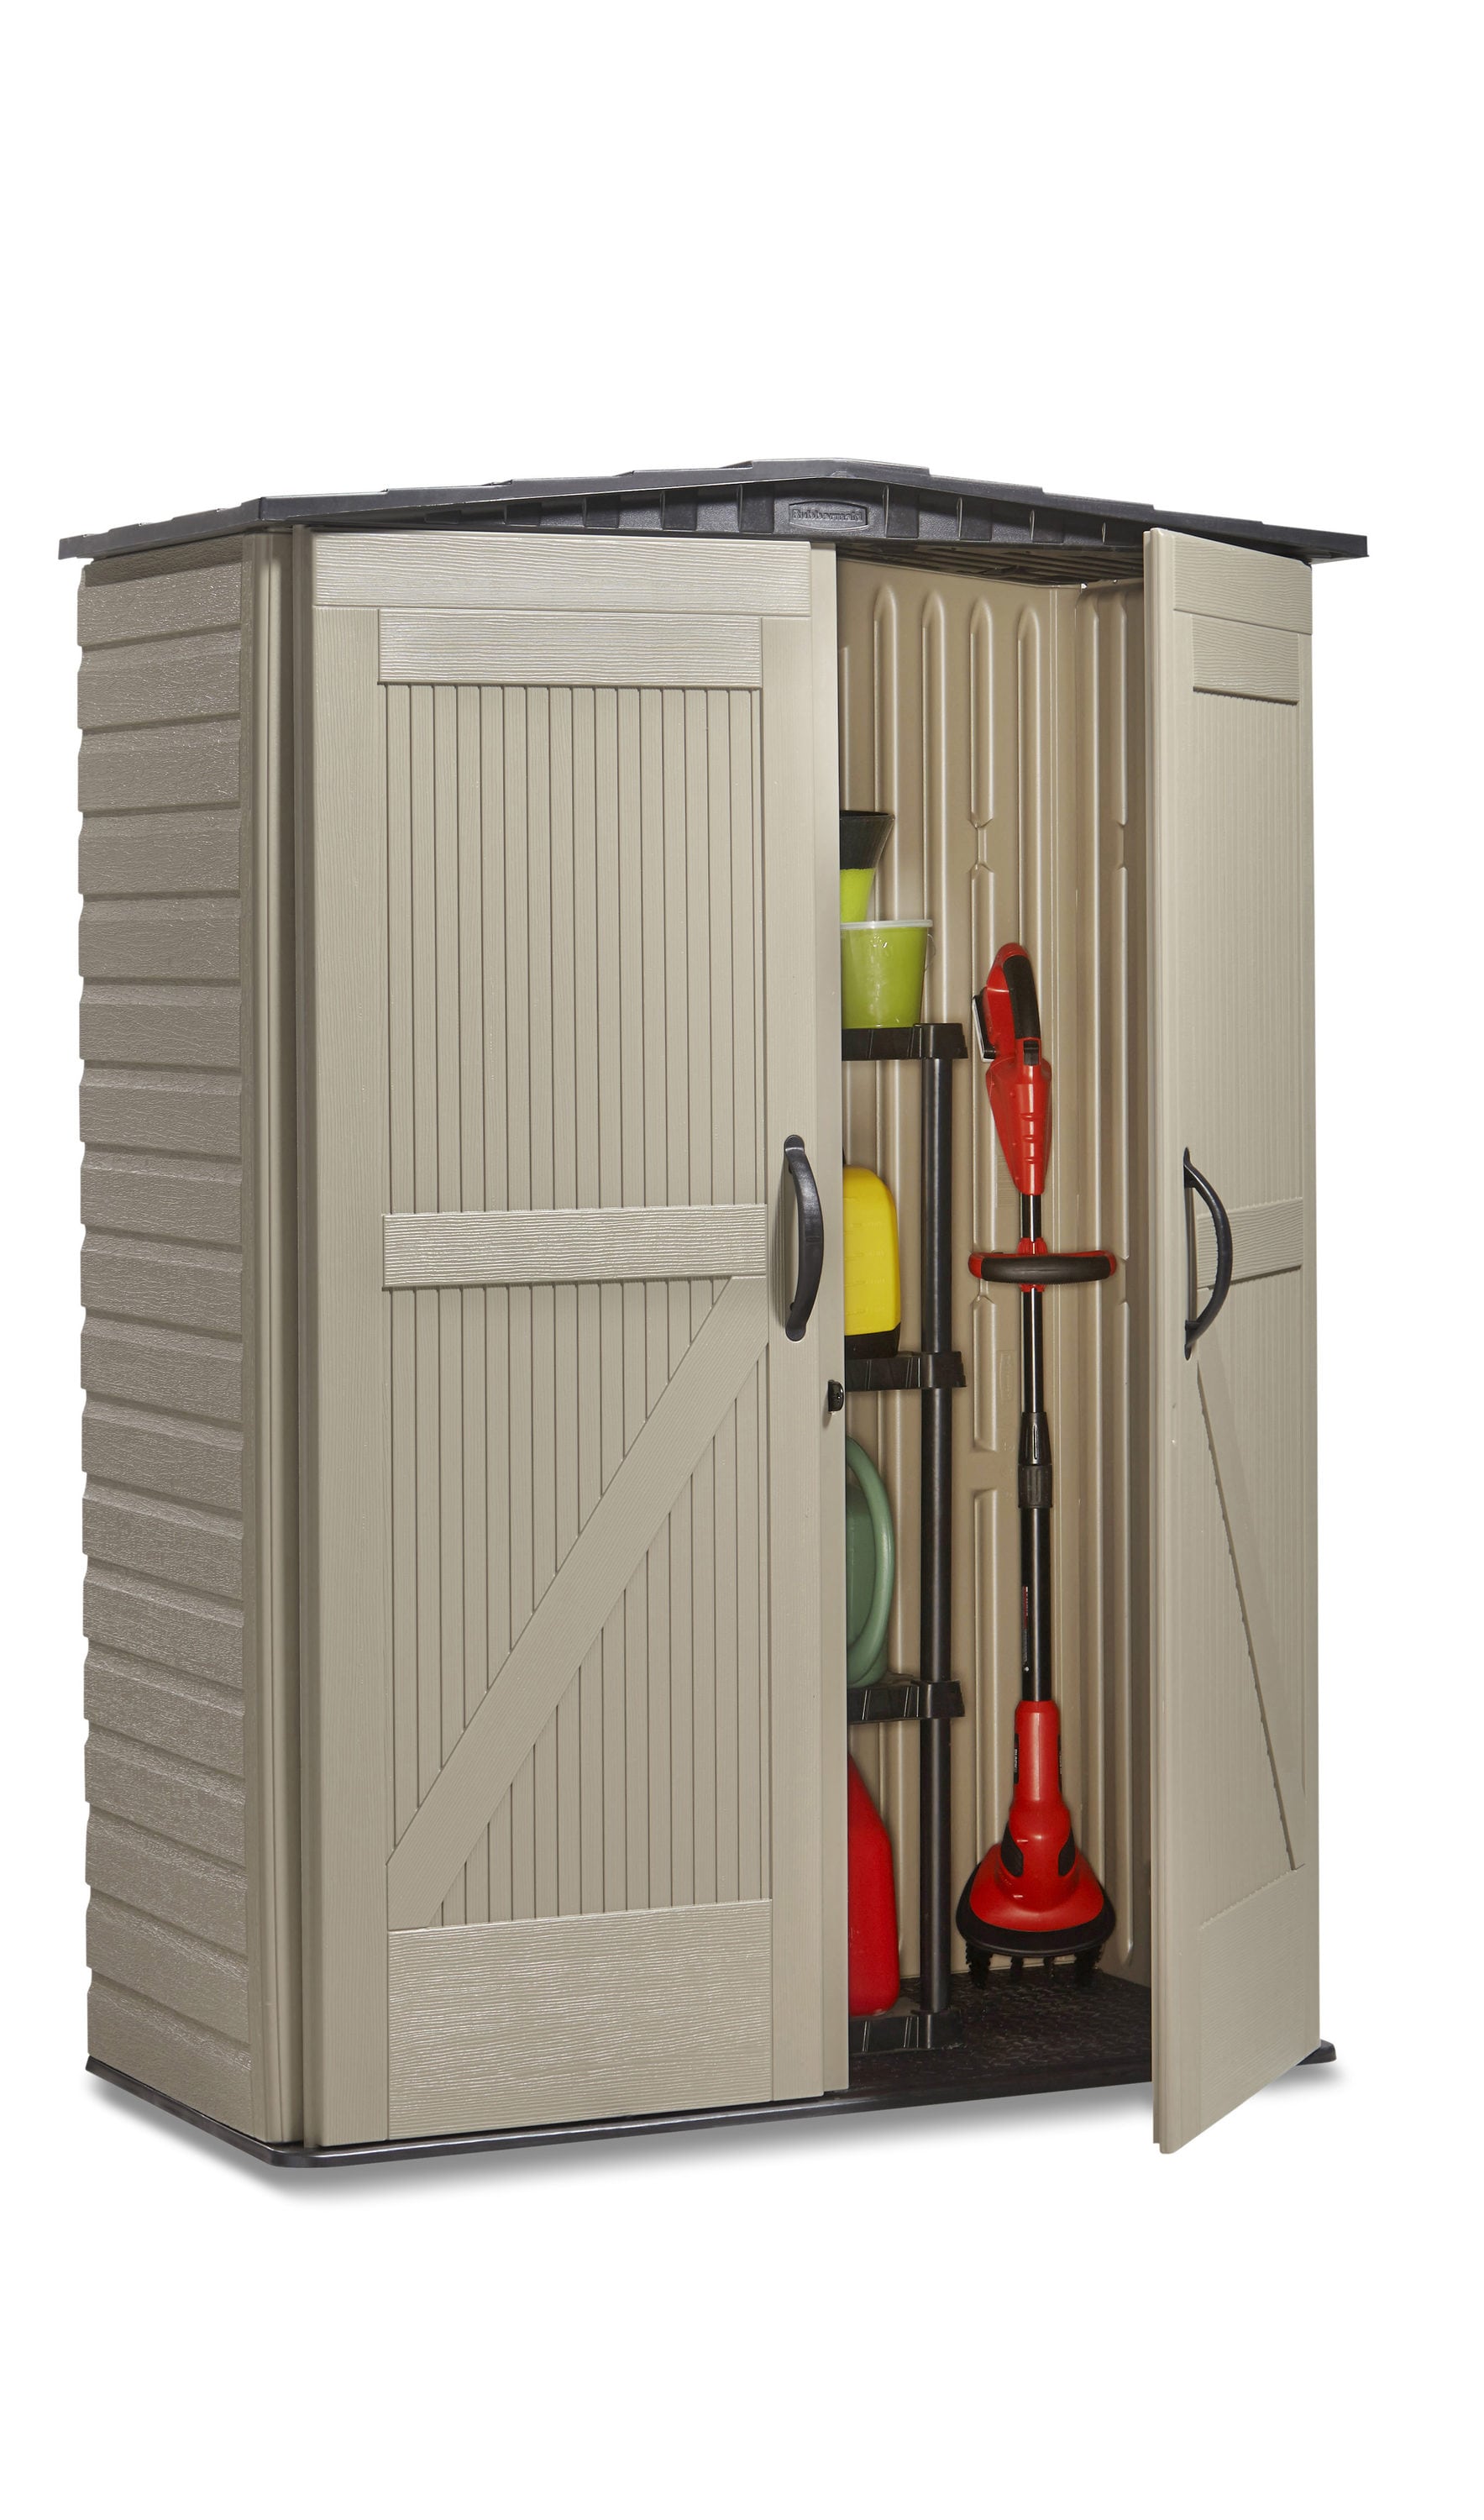 Rubbermaid 2 ft. x 2 ft. Vertical Storage Shed 2035894 - The Home